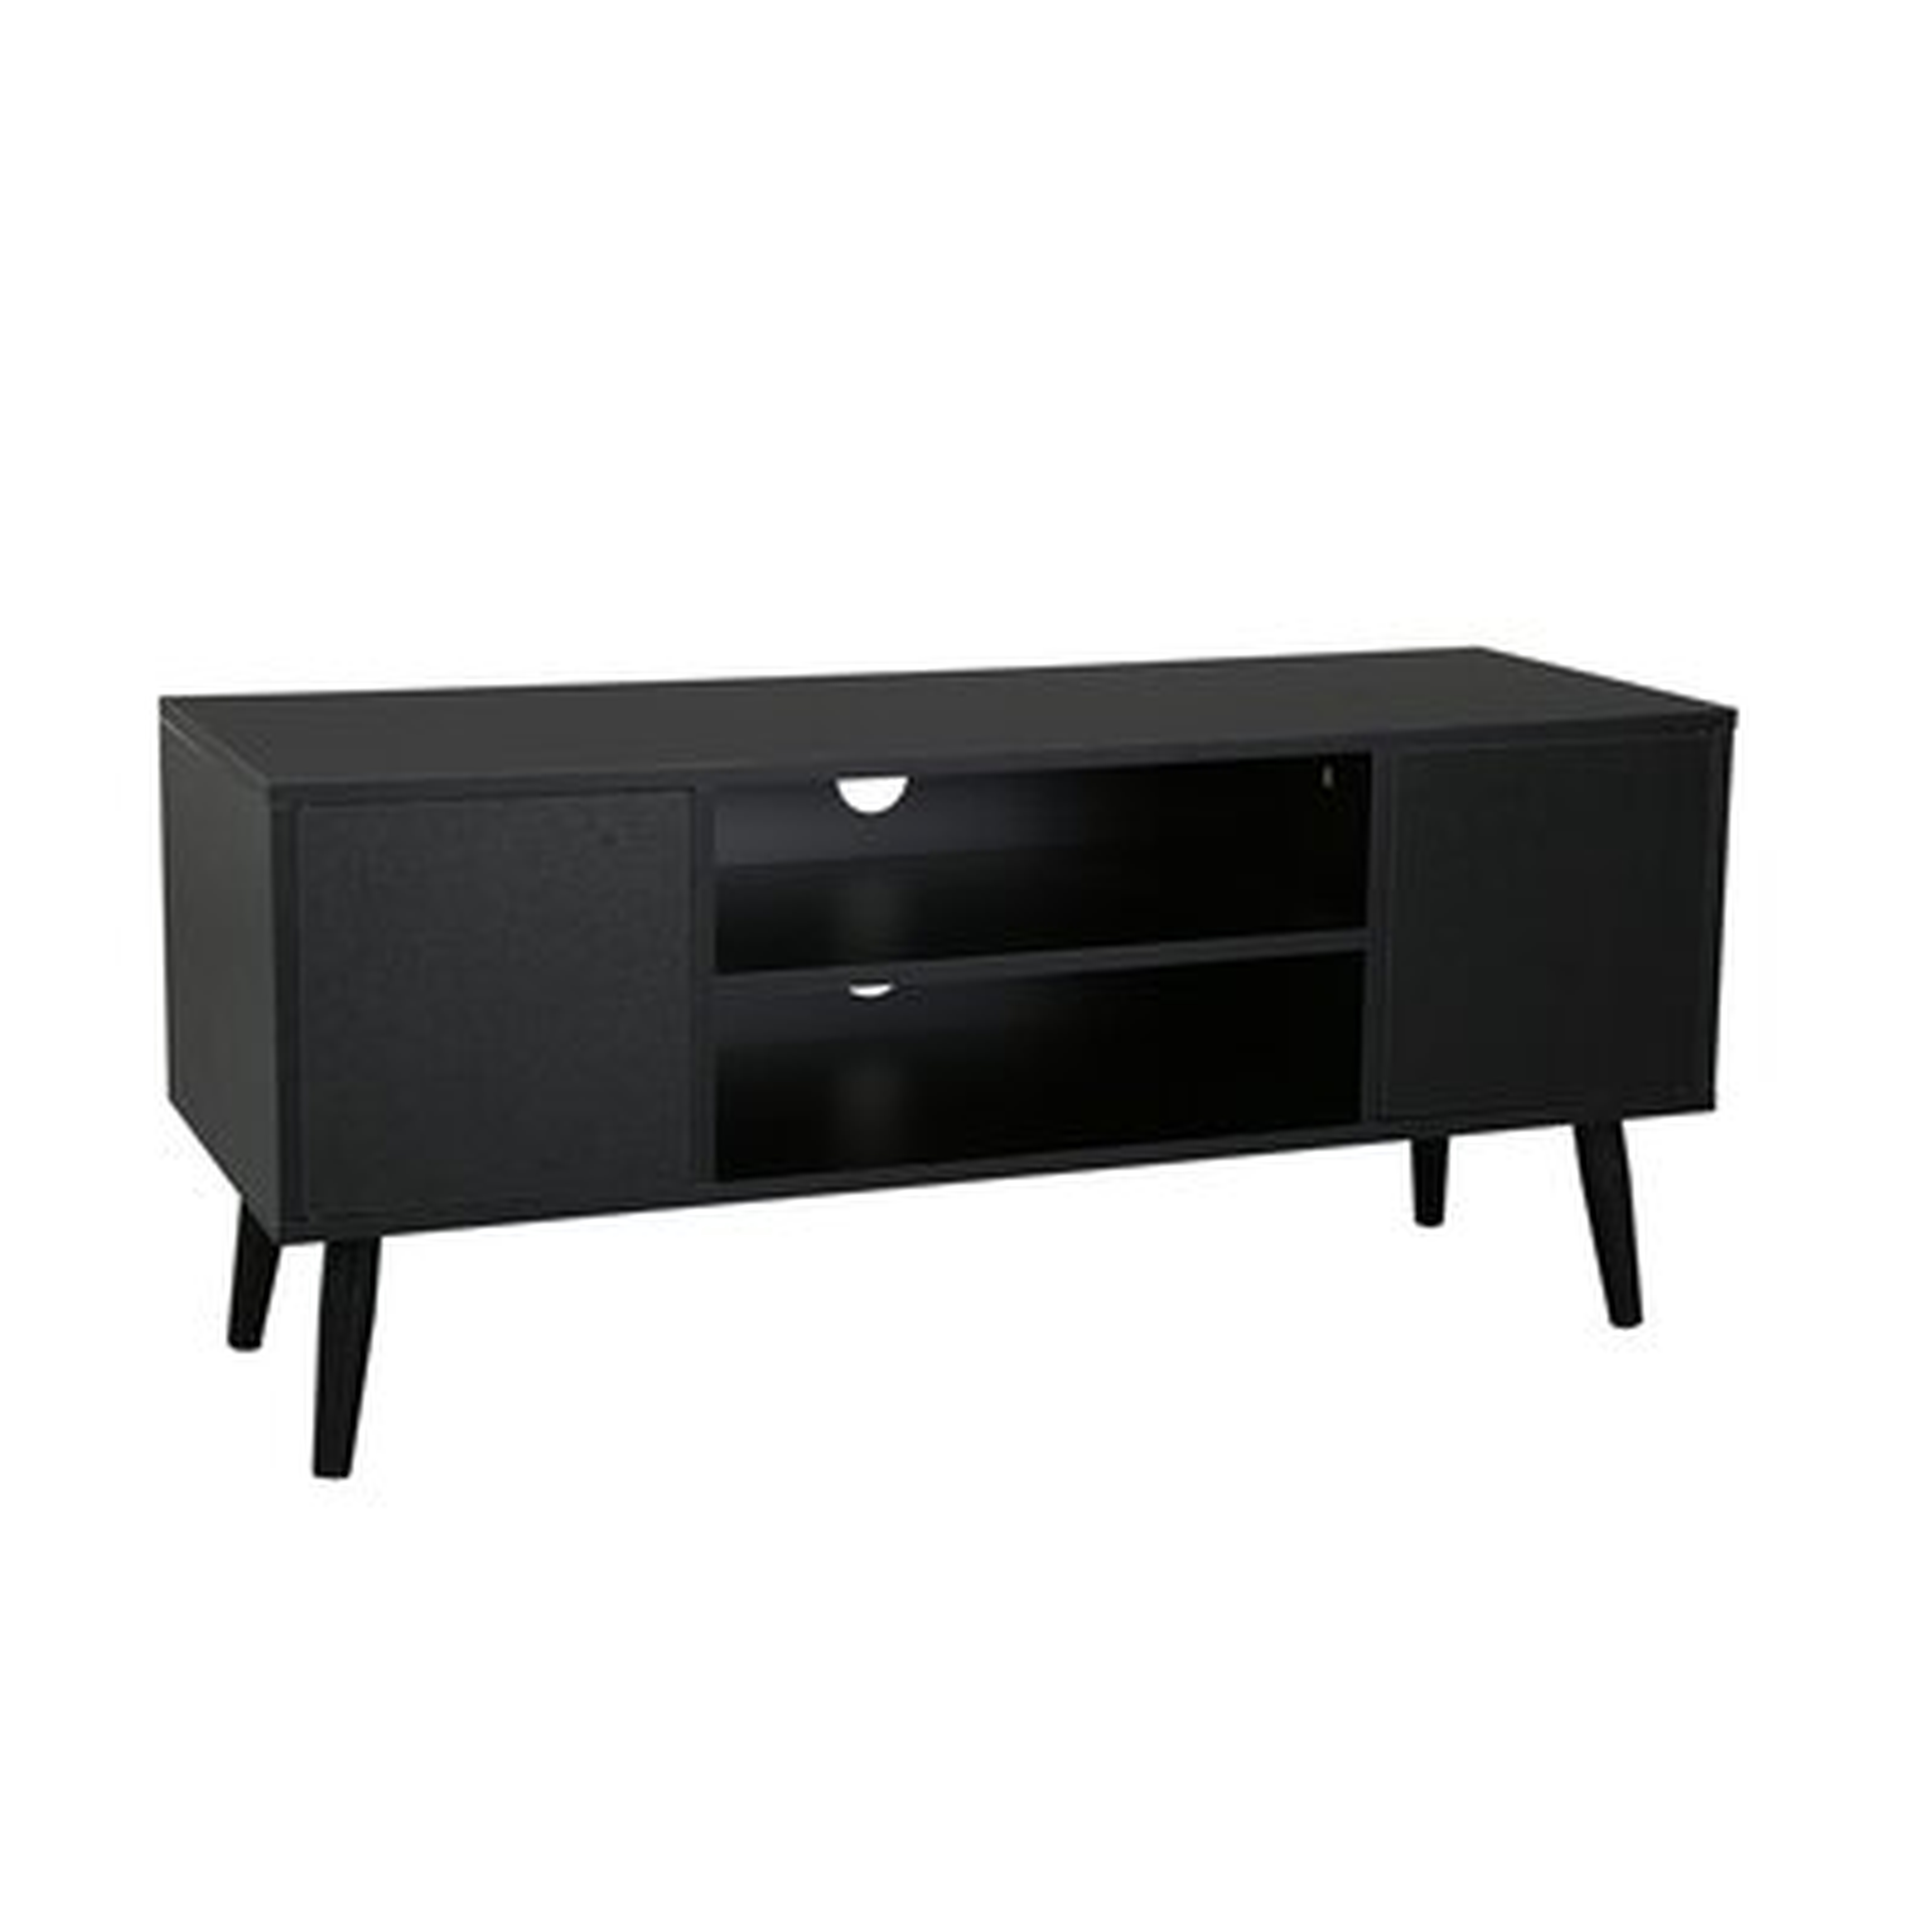 TV Stand for TVs up to 49" - Wayfair